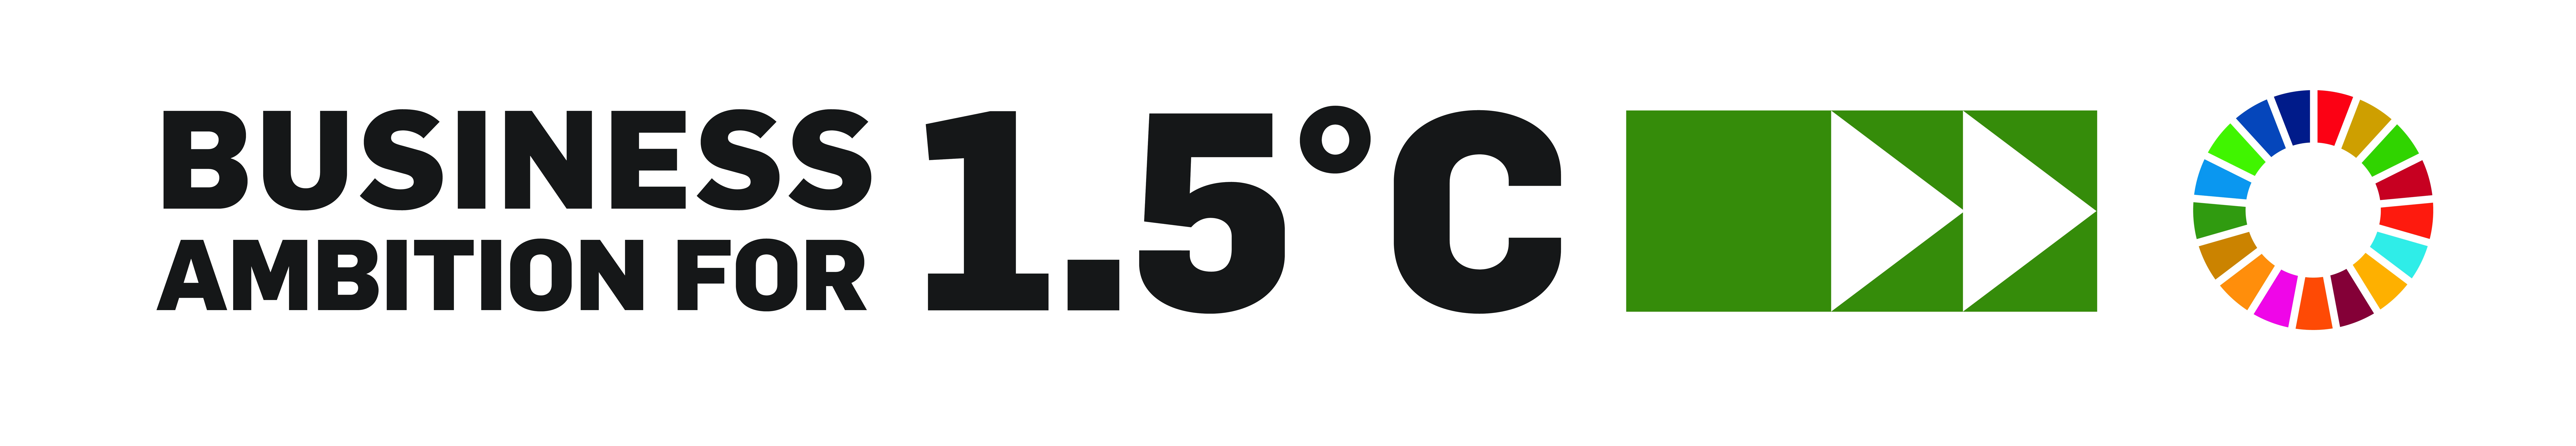 Business Ambition for 1.5°C logo